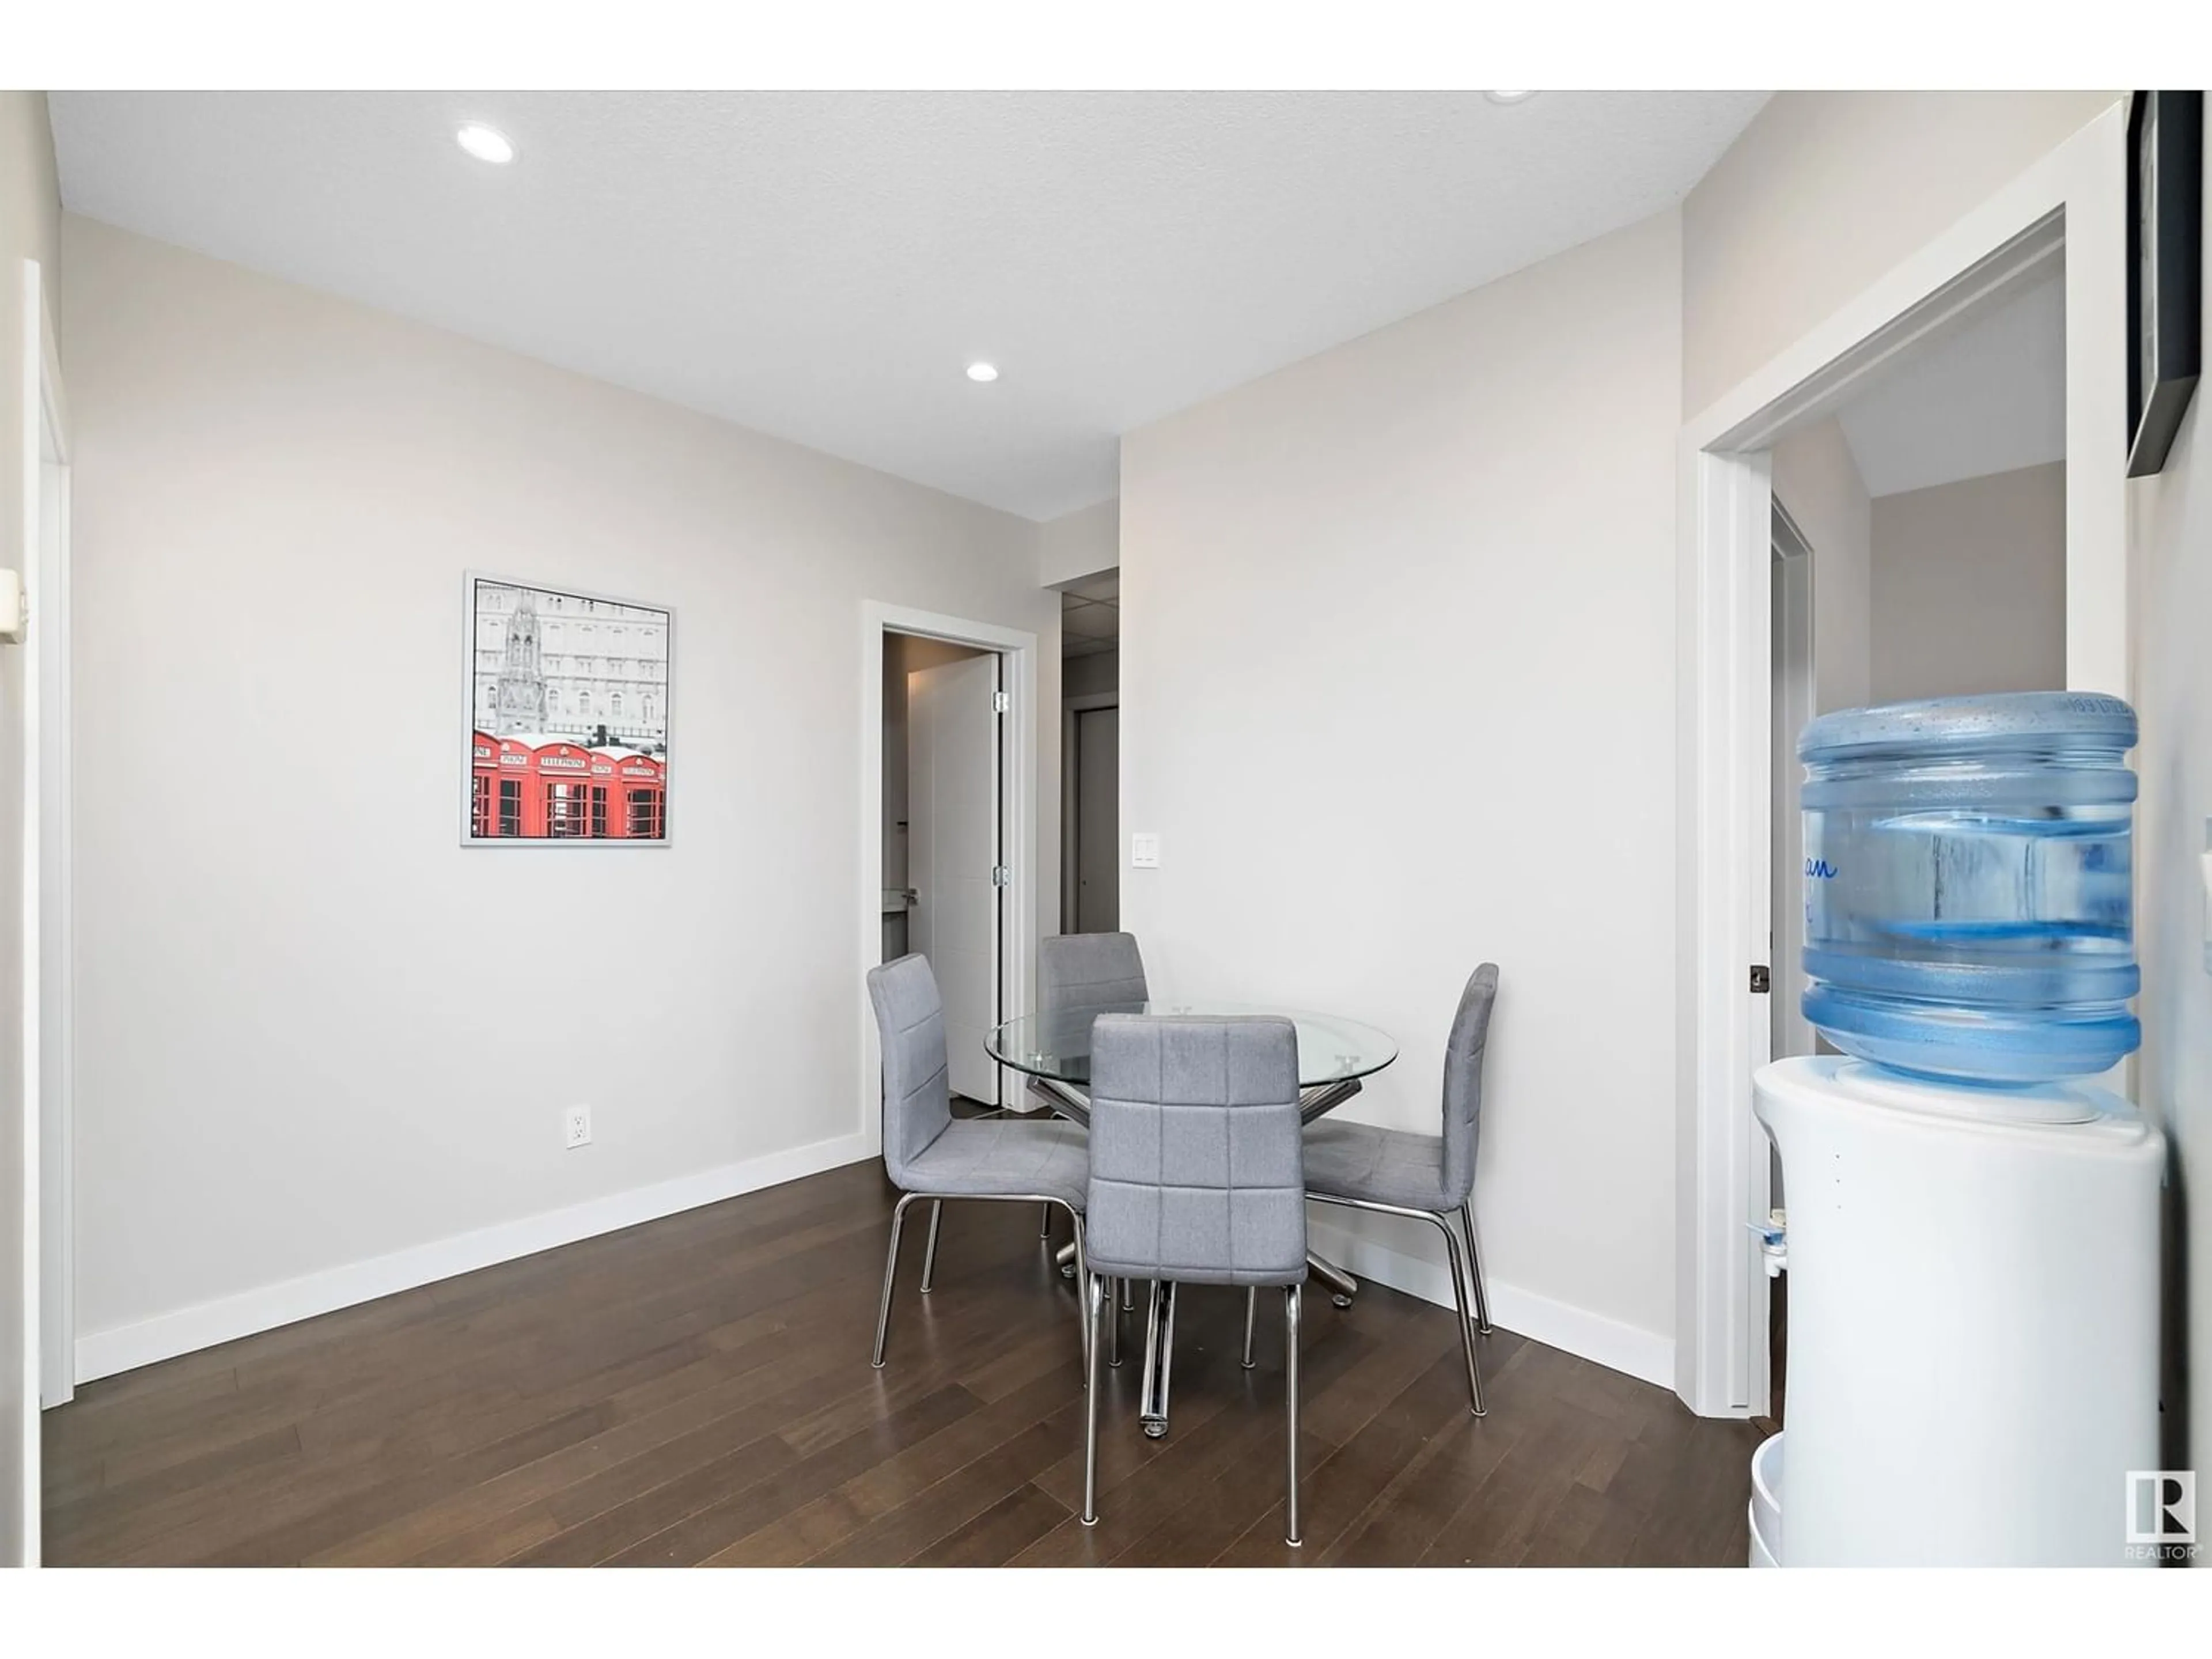 A pic of a room for #1203 10238 103 Street NW, Edmonton Alberta T5J0G6